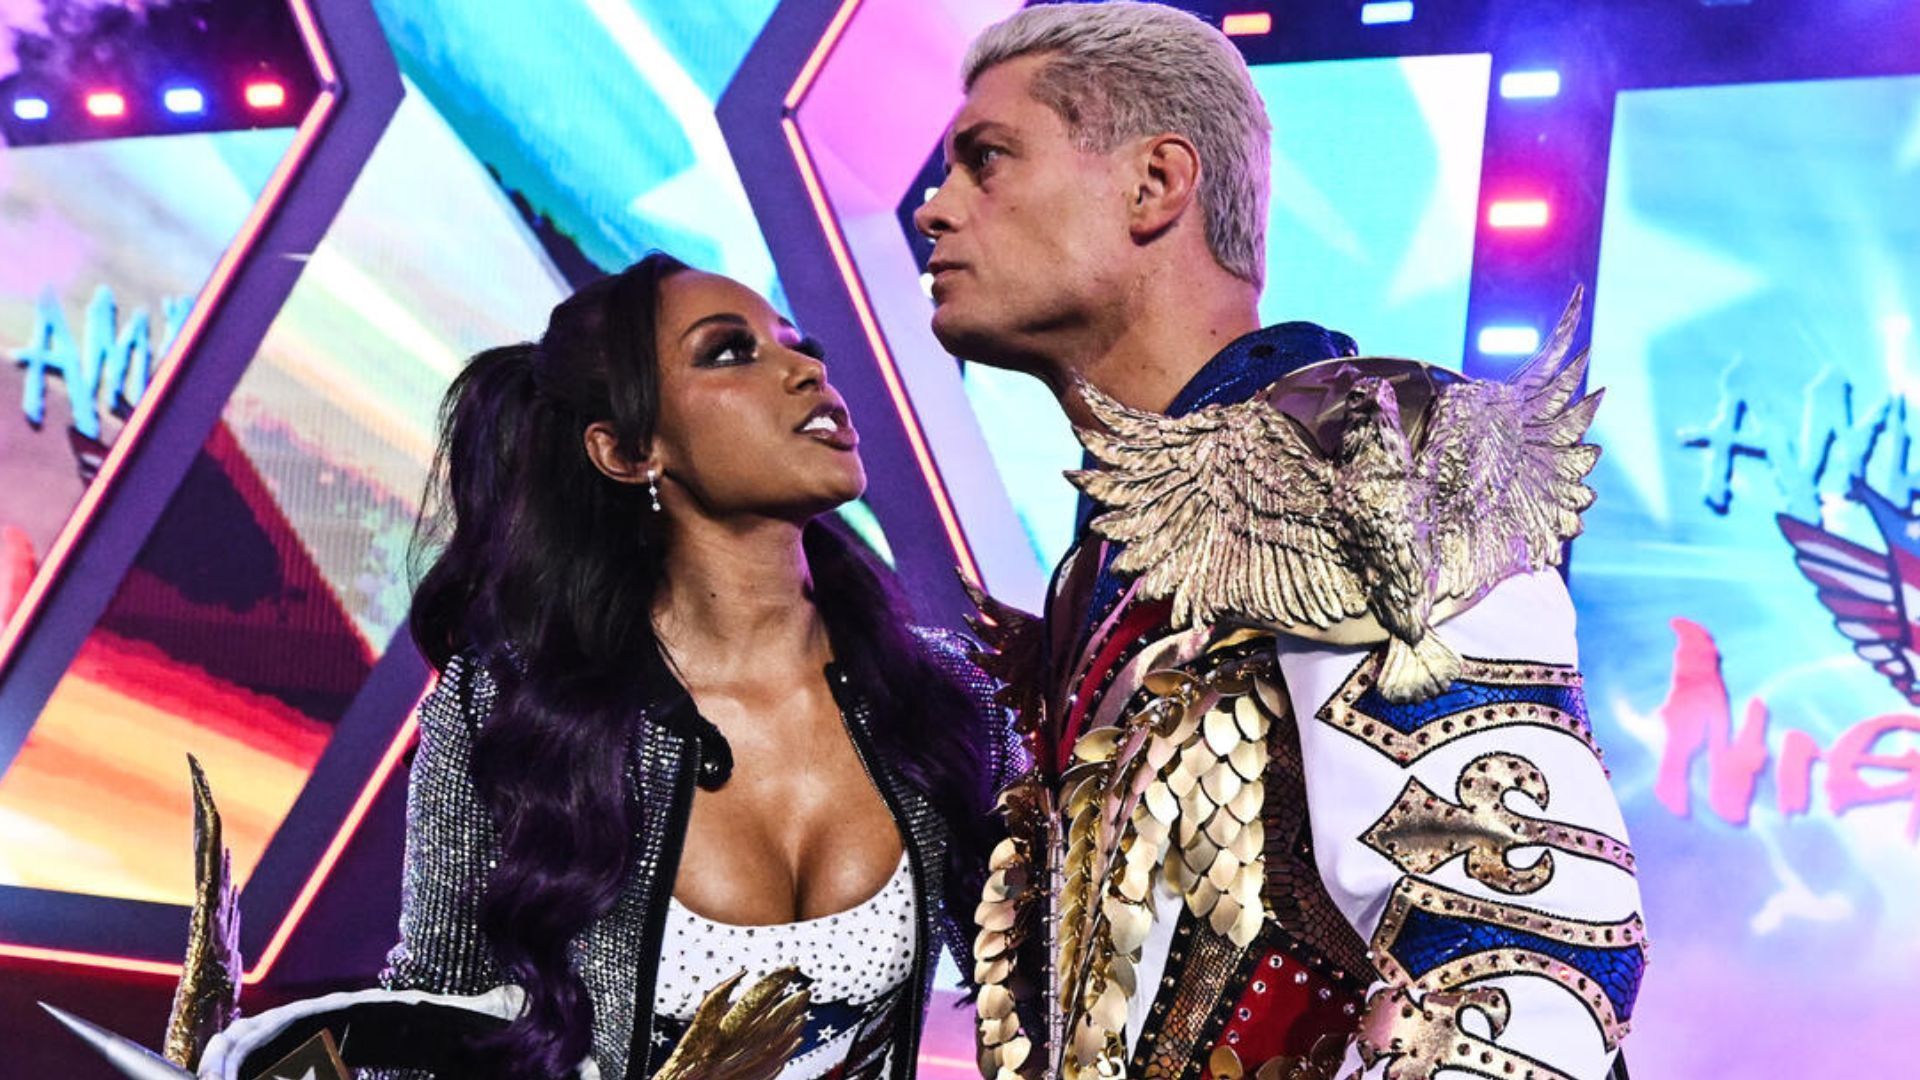 Cody and Brandi Rhodes used to work for All Elite Wrestling. [Photo: WWE.com]